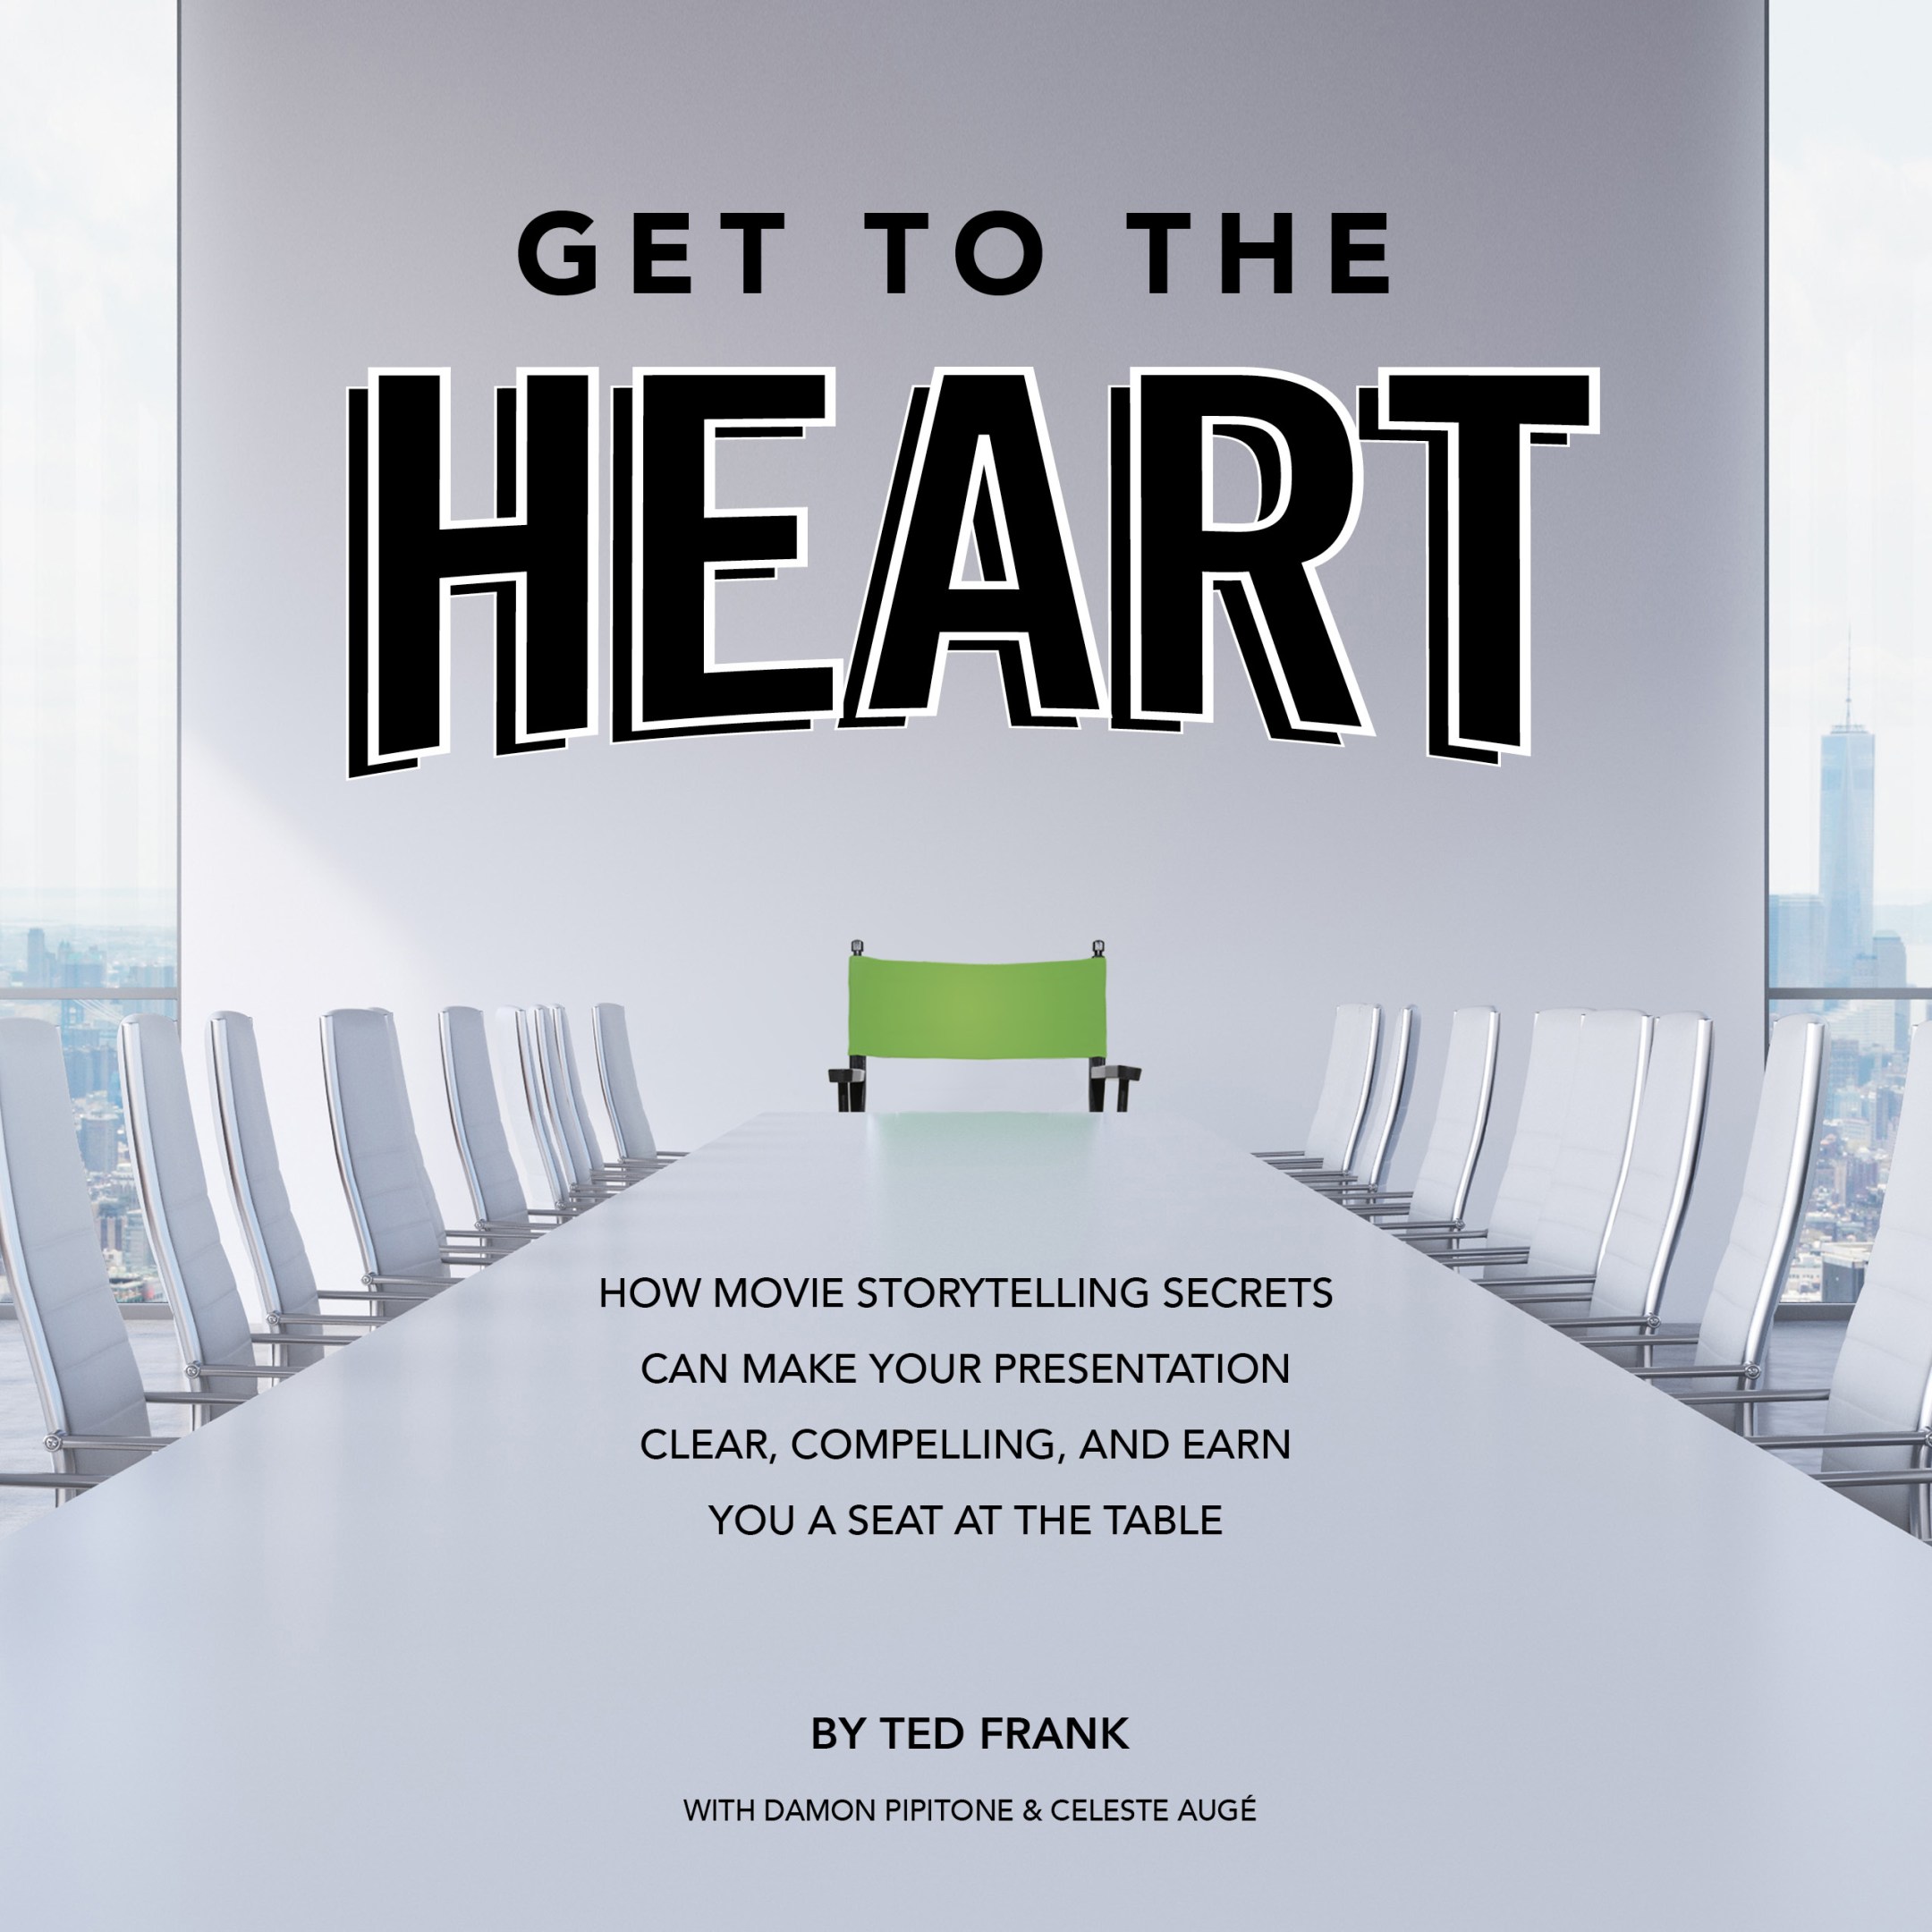 Get to the Heart book cover